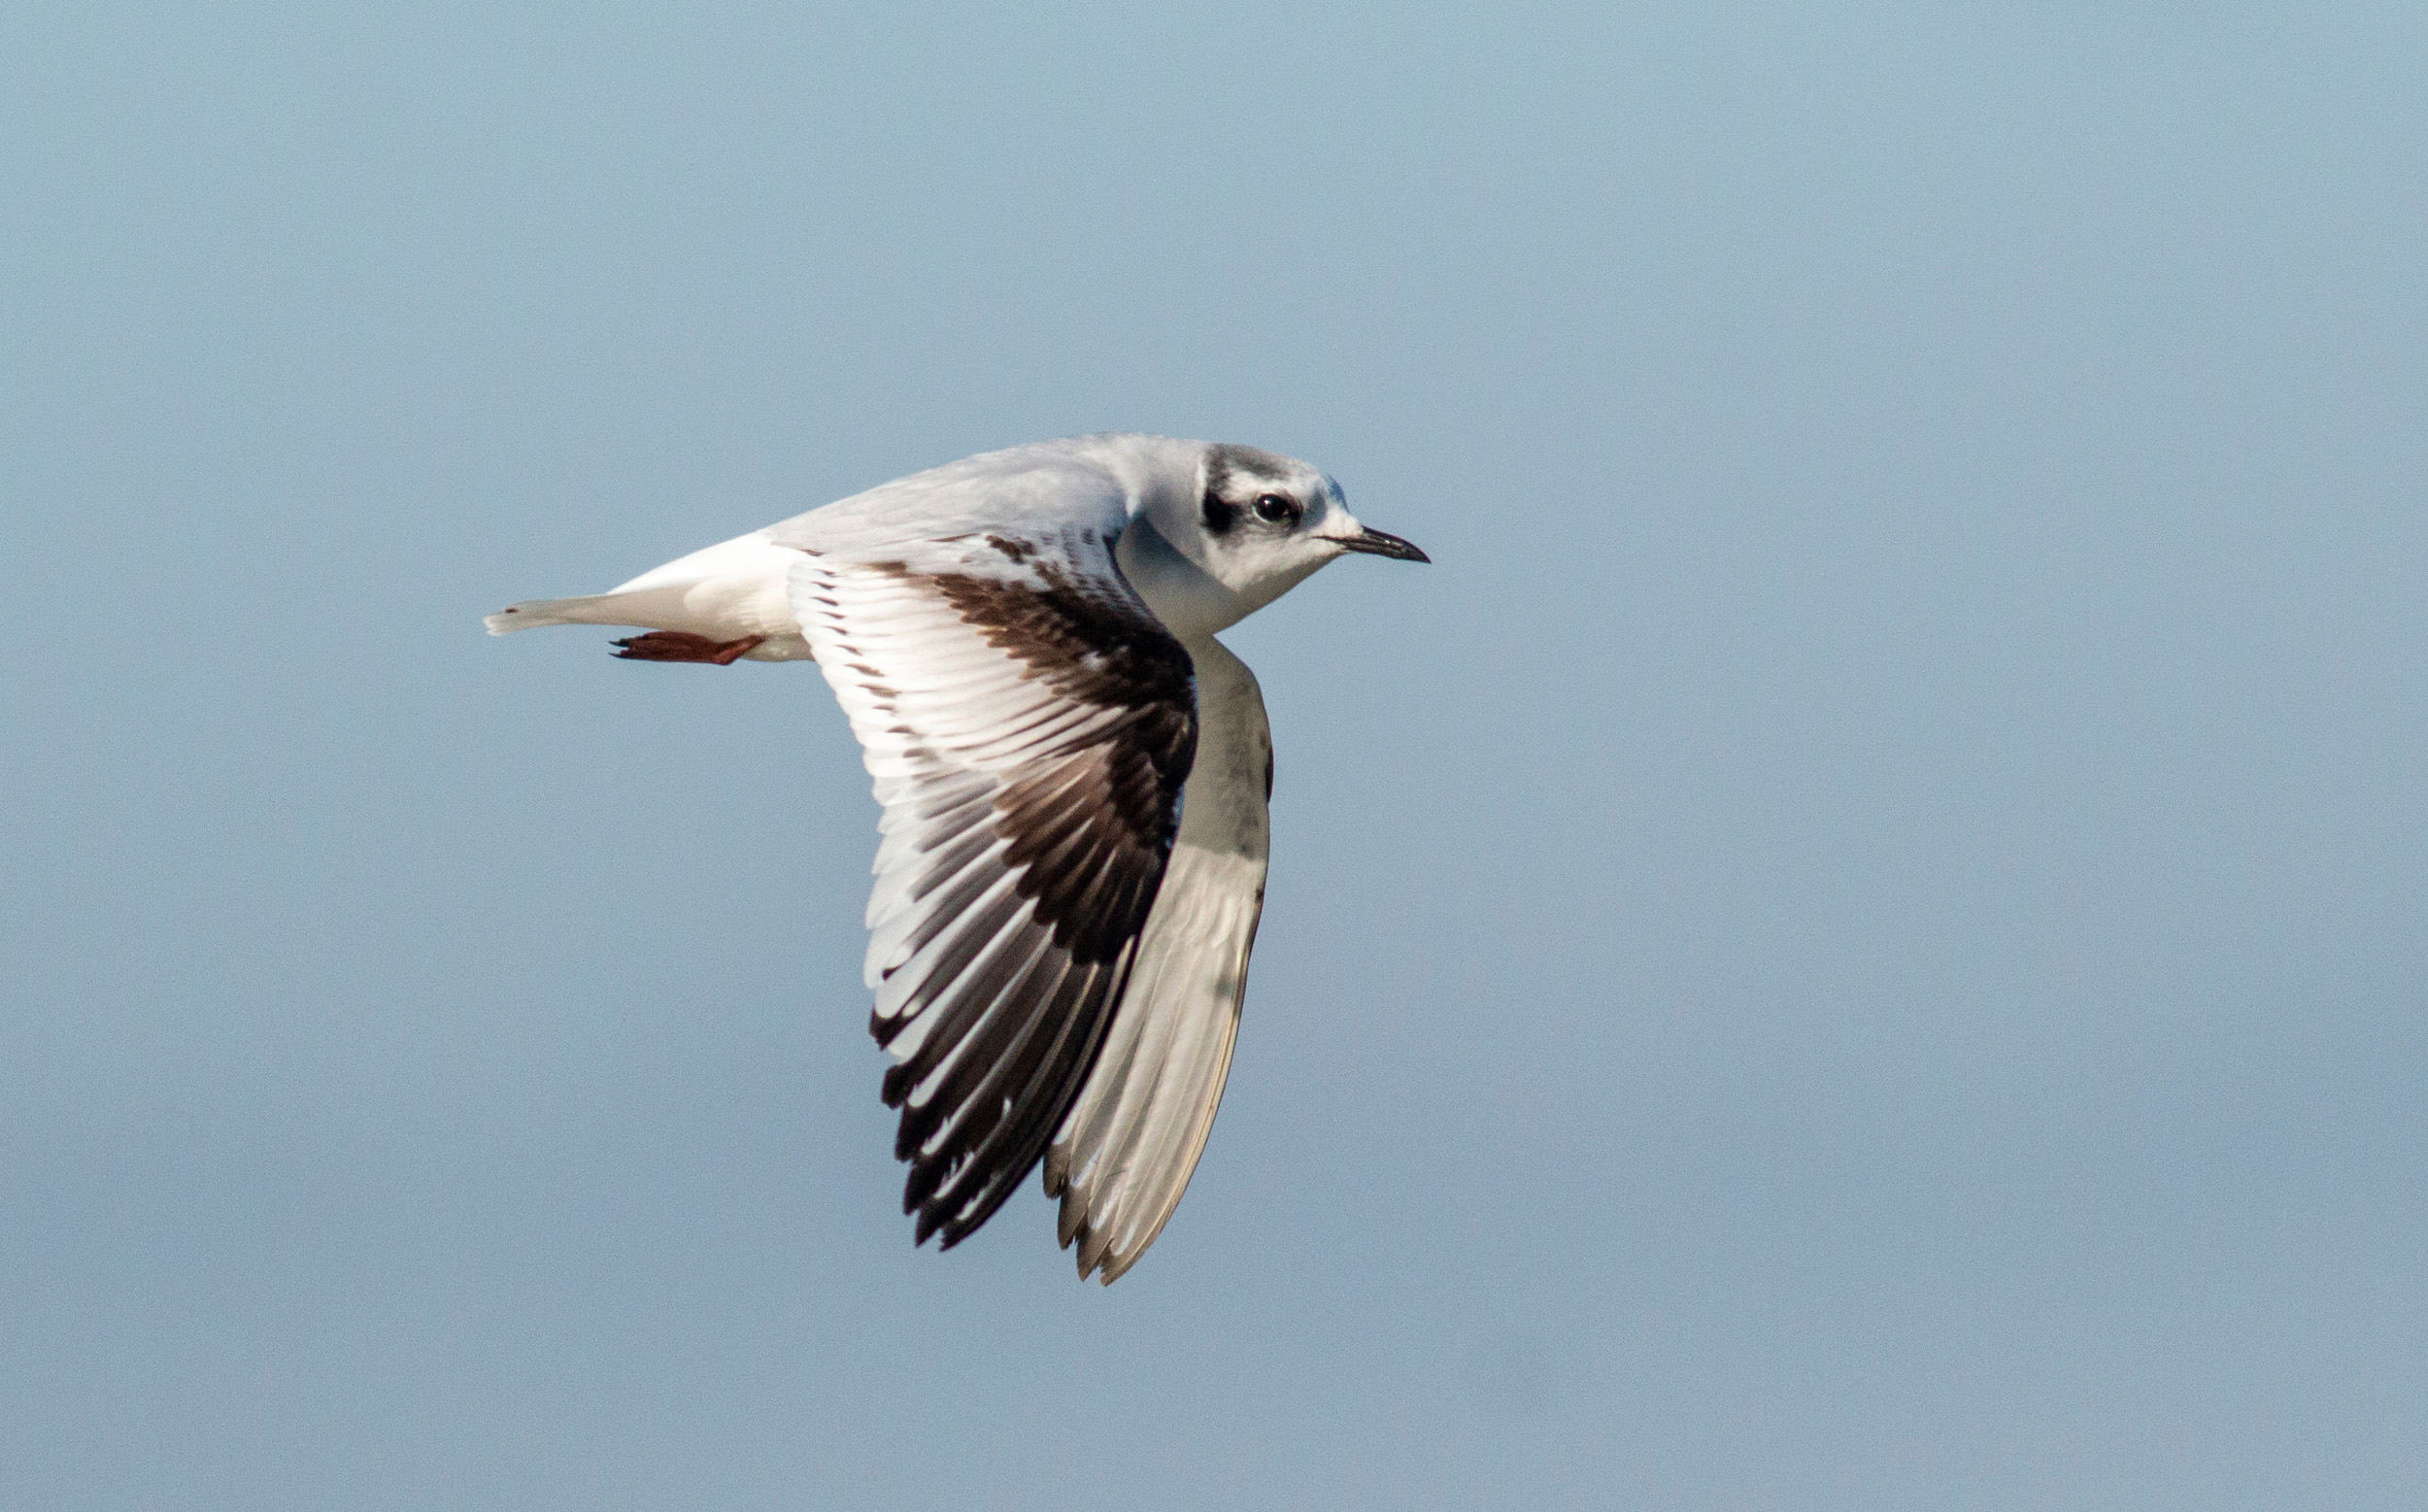 A Little Gull in winter plumage mid flight with their wings down.